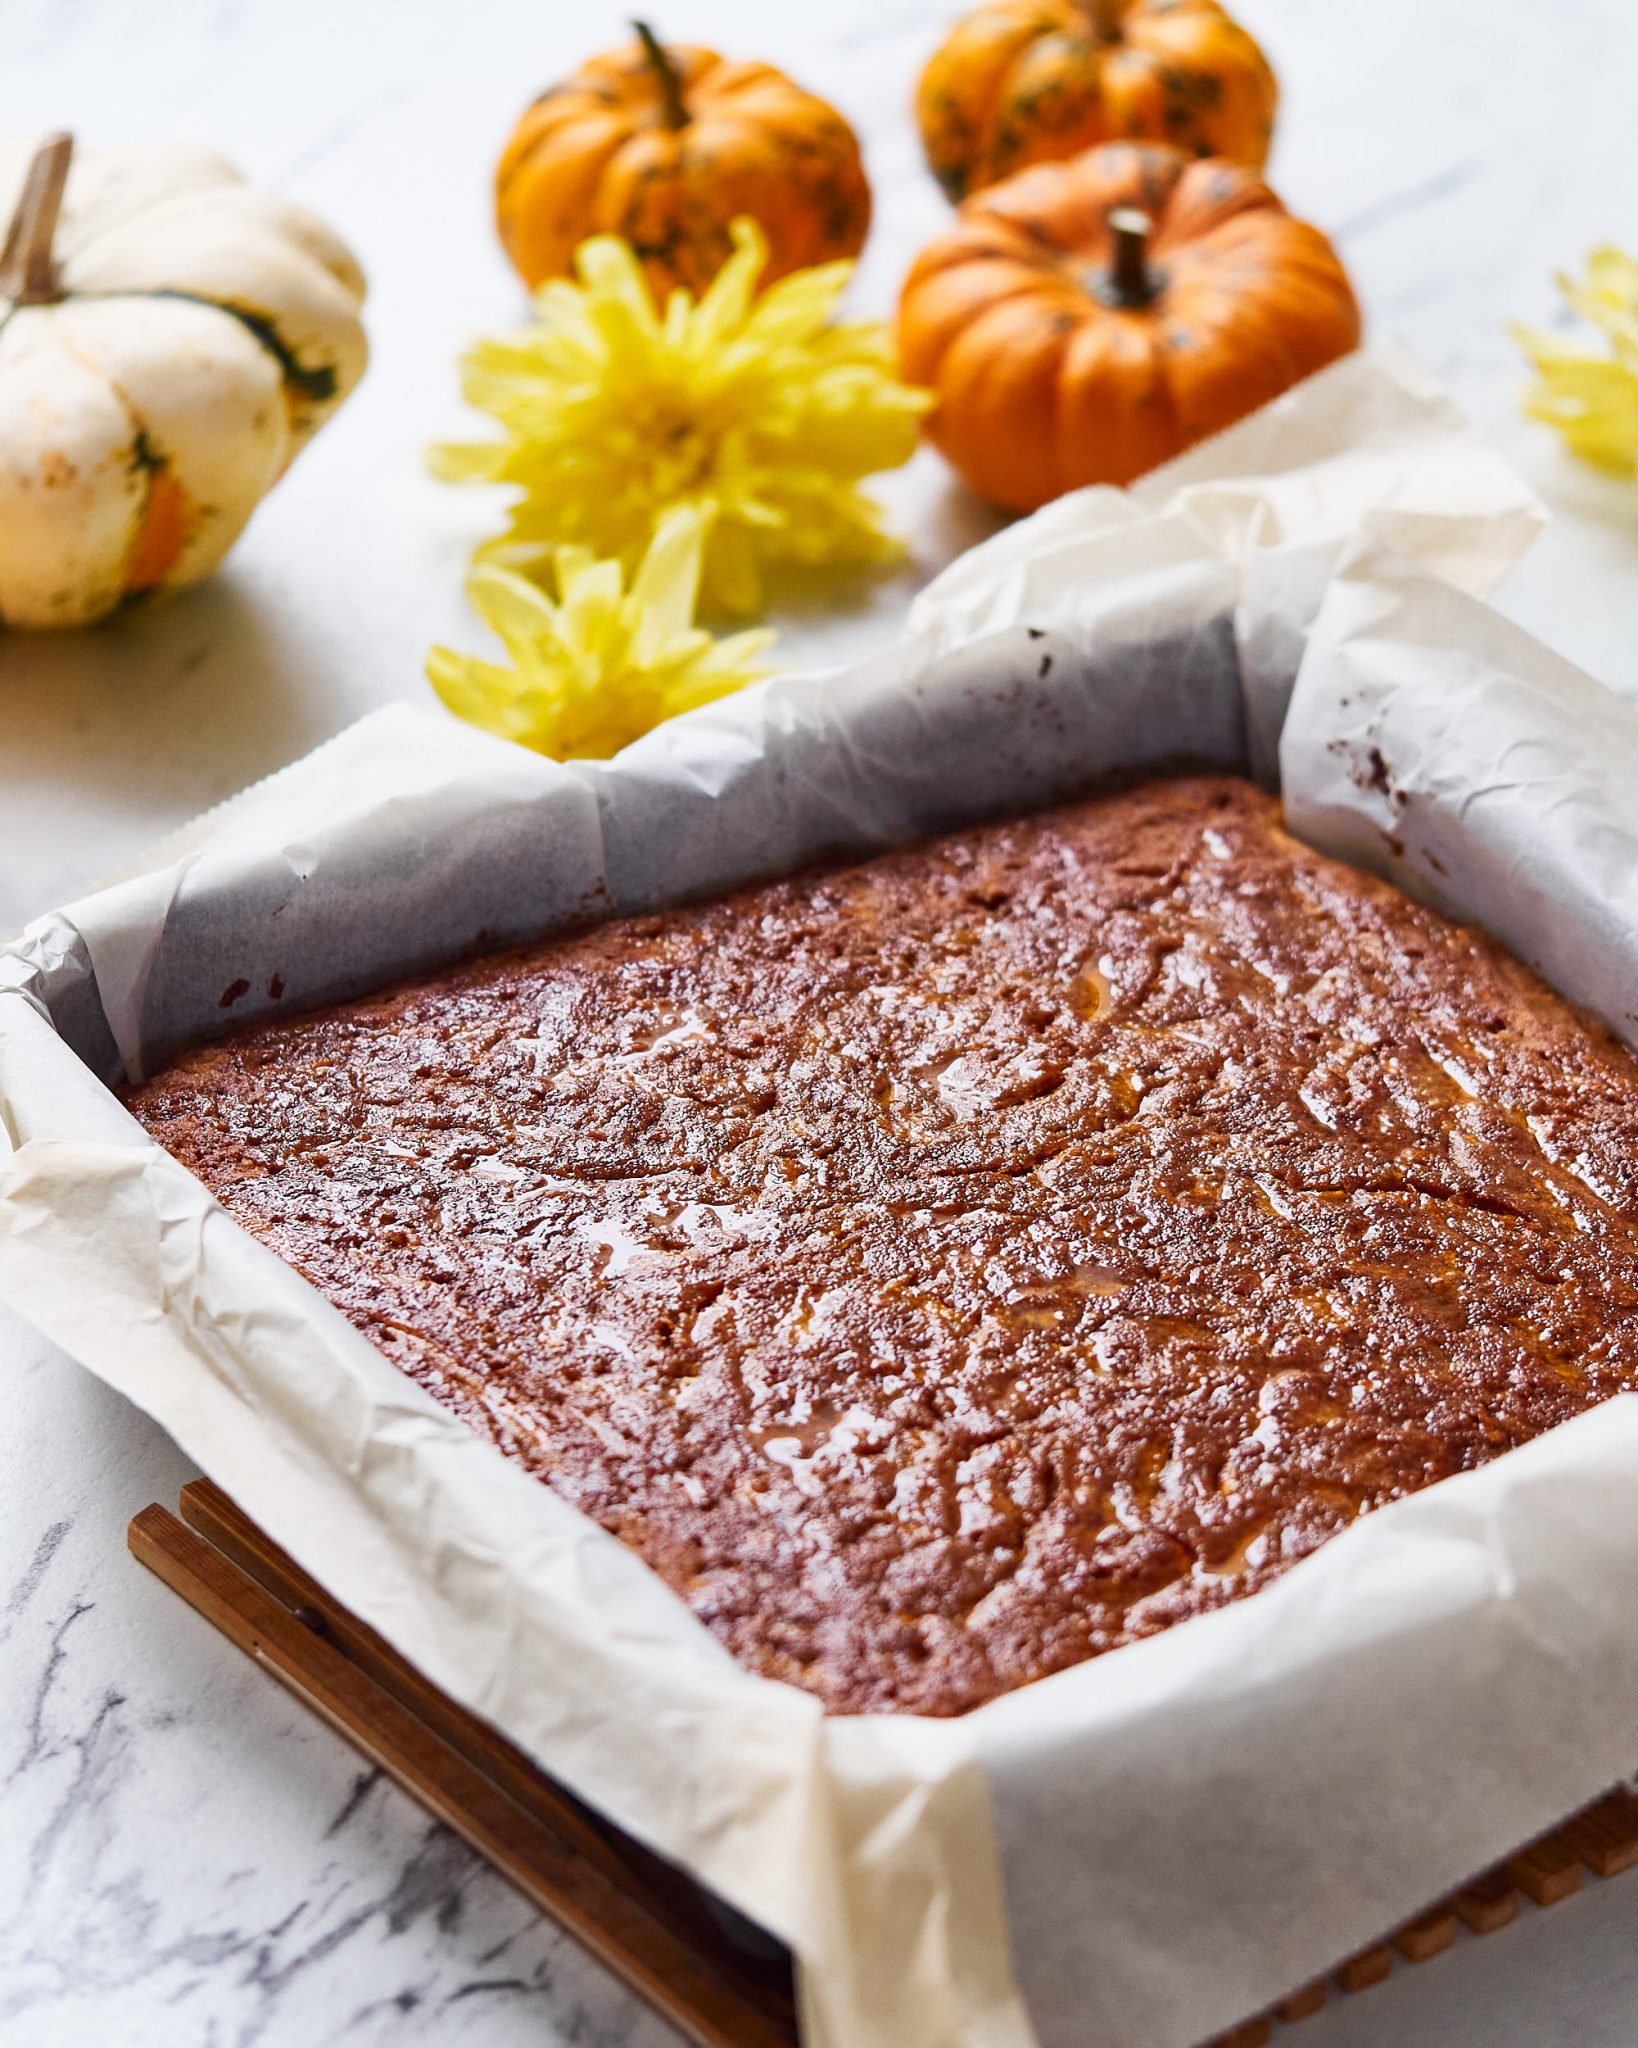 Pumpkin cake in syrup